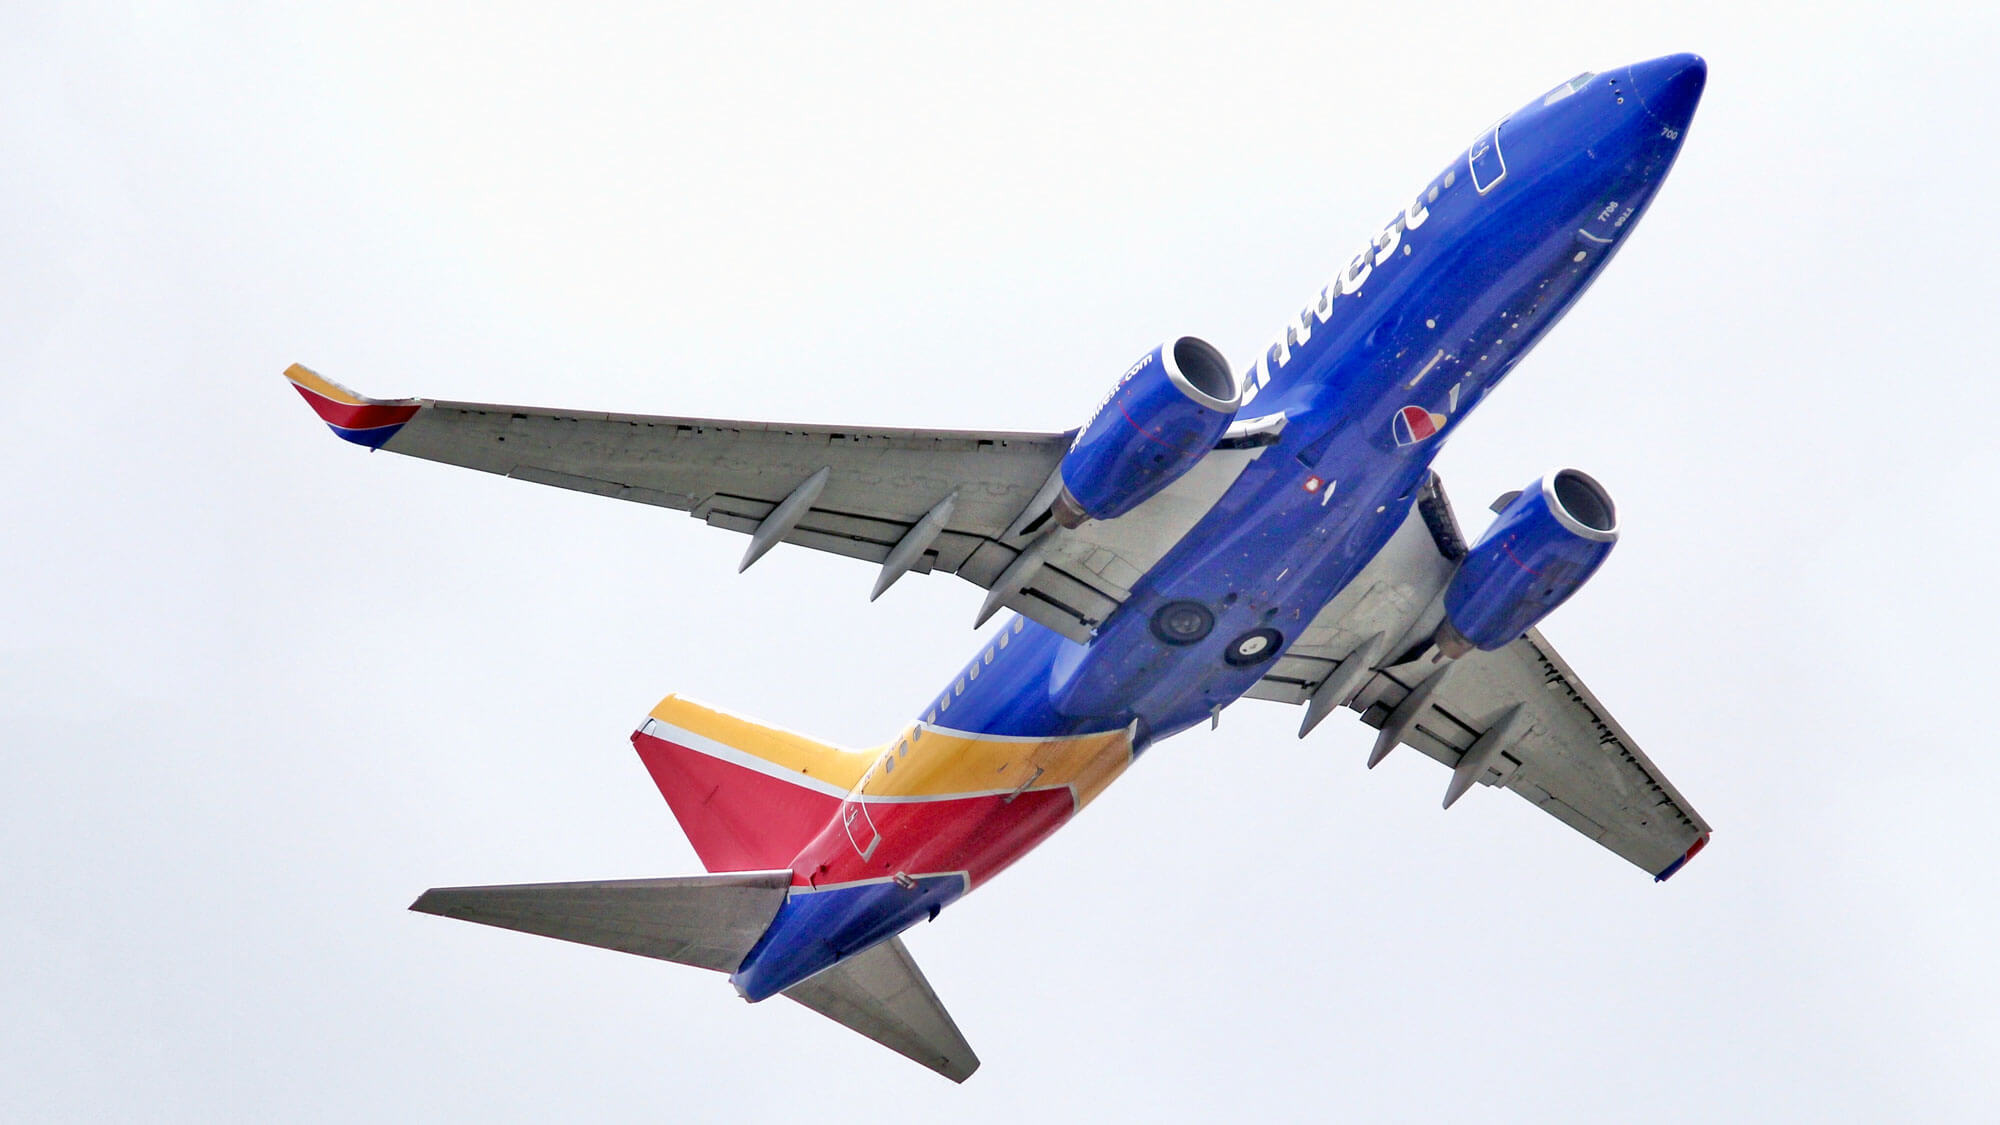 Southwest Airlines focuses on price "transfarency"